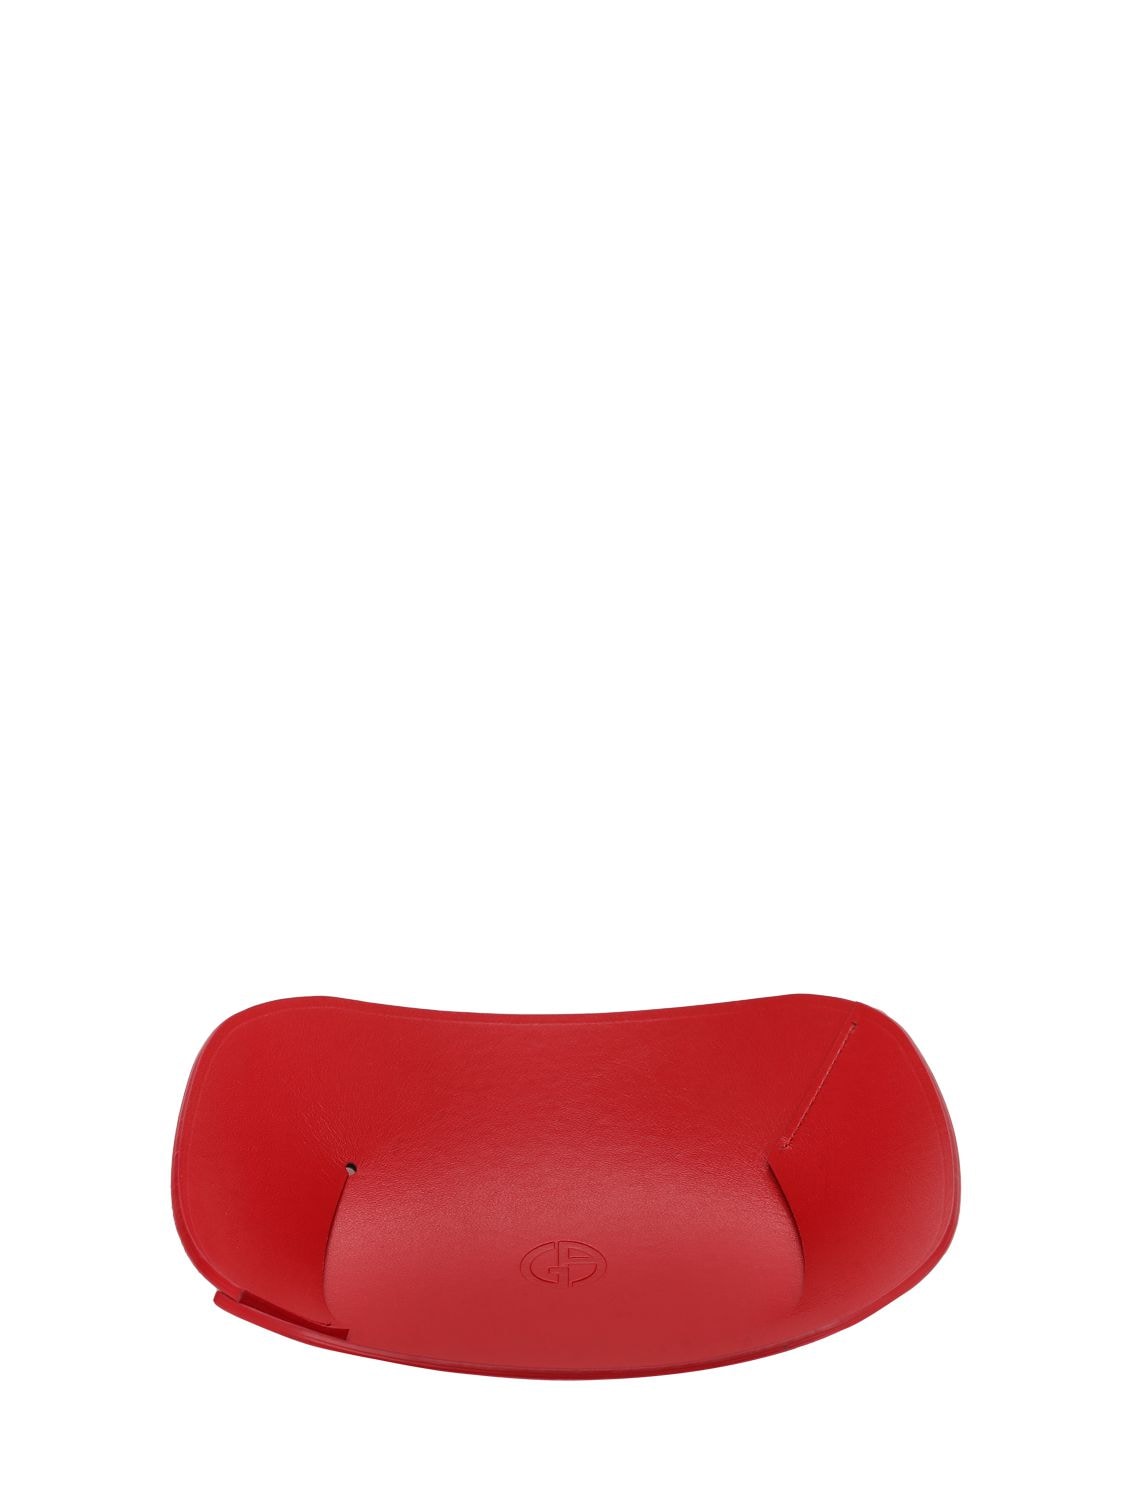 Armani/casa Small Pop Valet Tray In Red